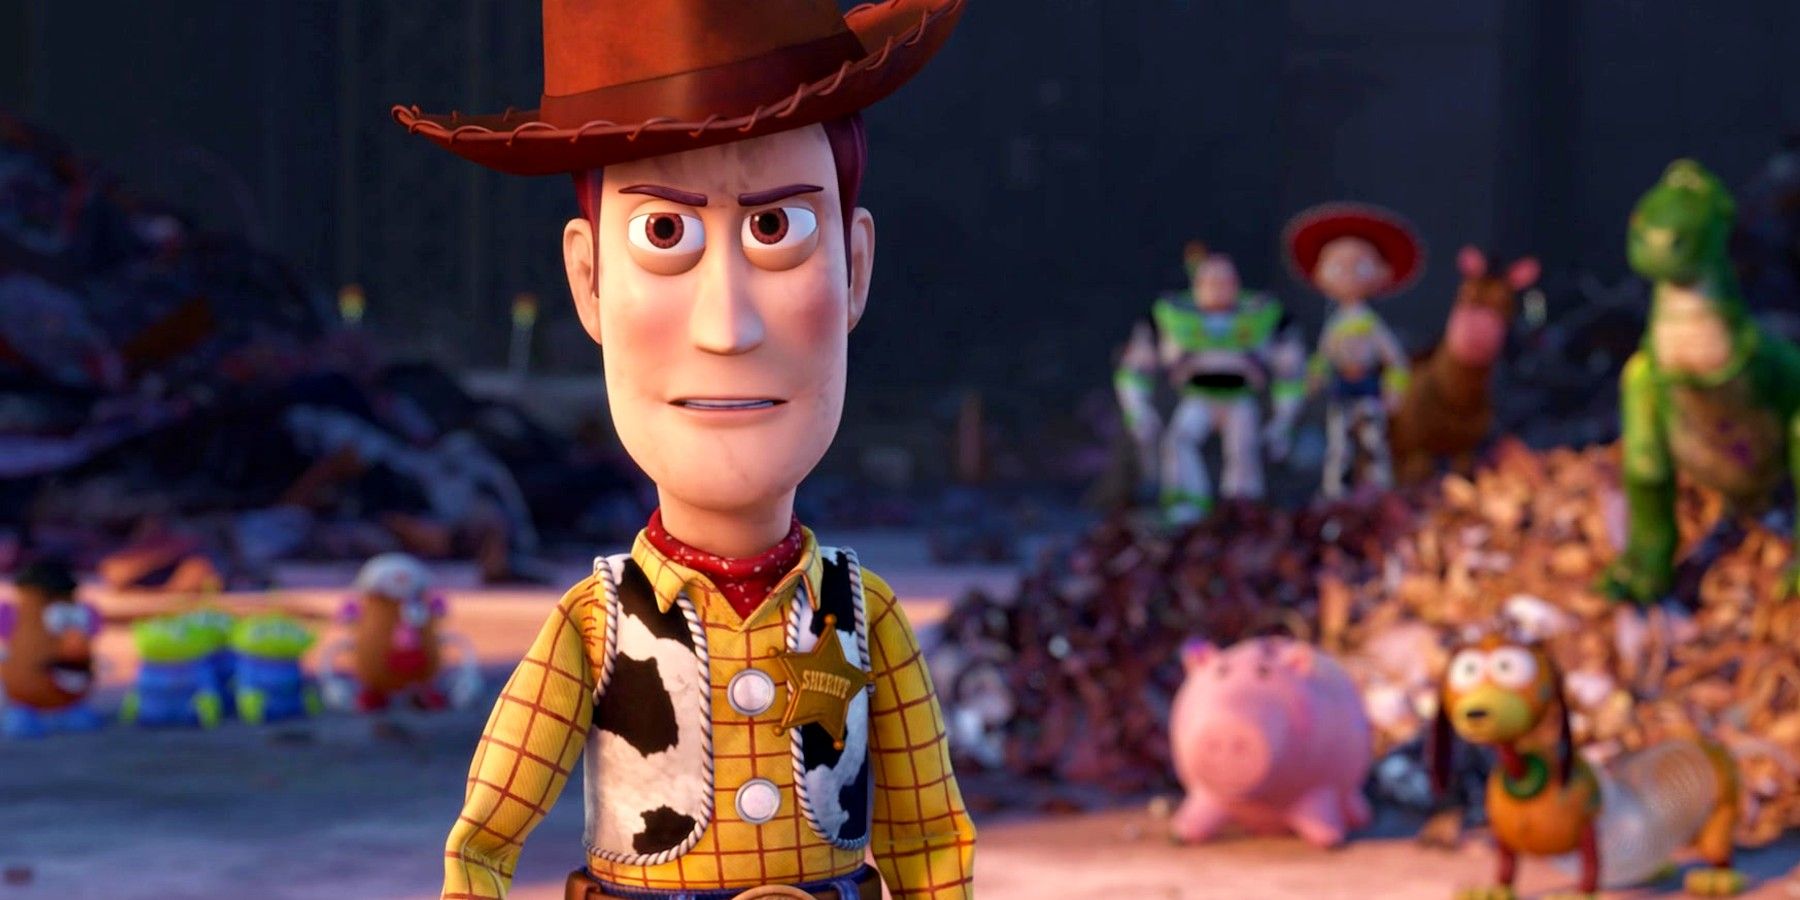 Woody Looking Annoyed with the Toys in the Back in Toy Story 3